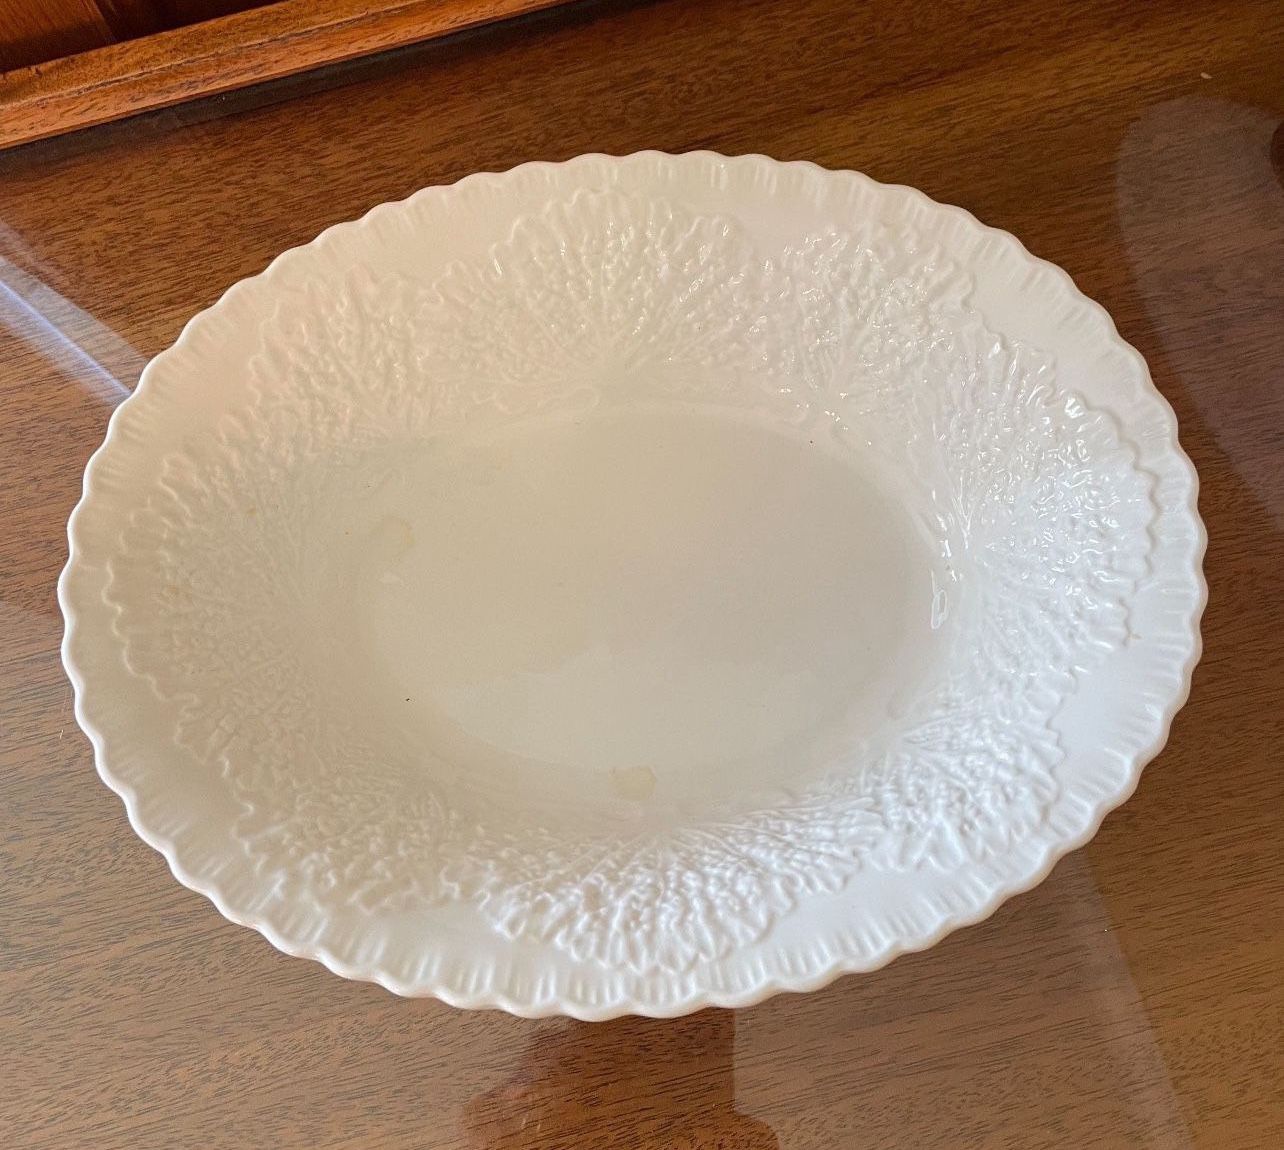 RARE Vintage Spode Copeland China, Cabbage pattern oval vegetable bowl